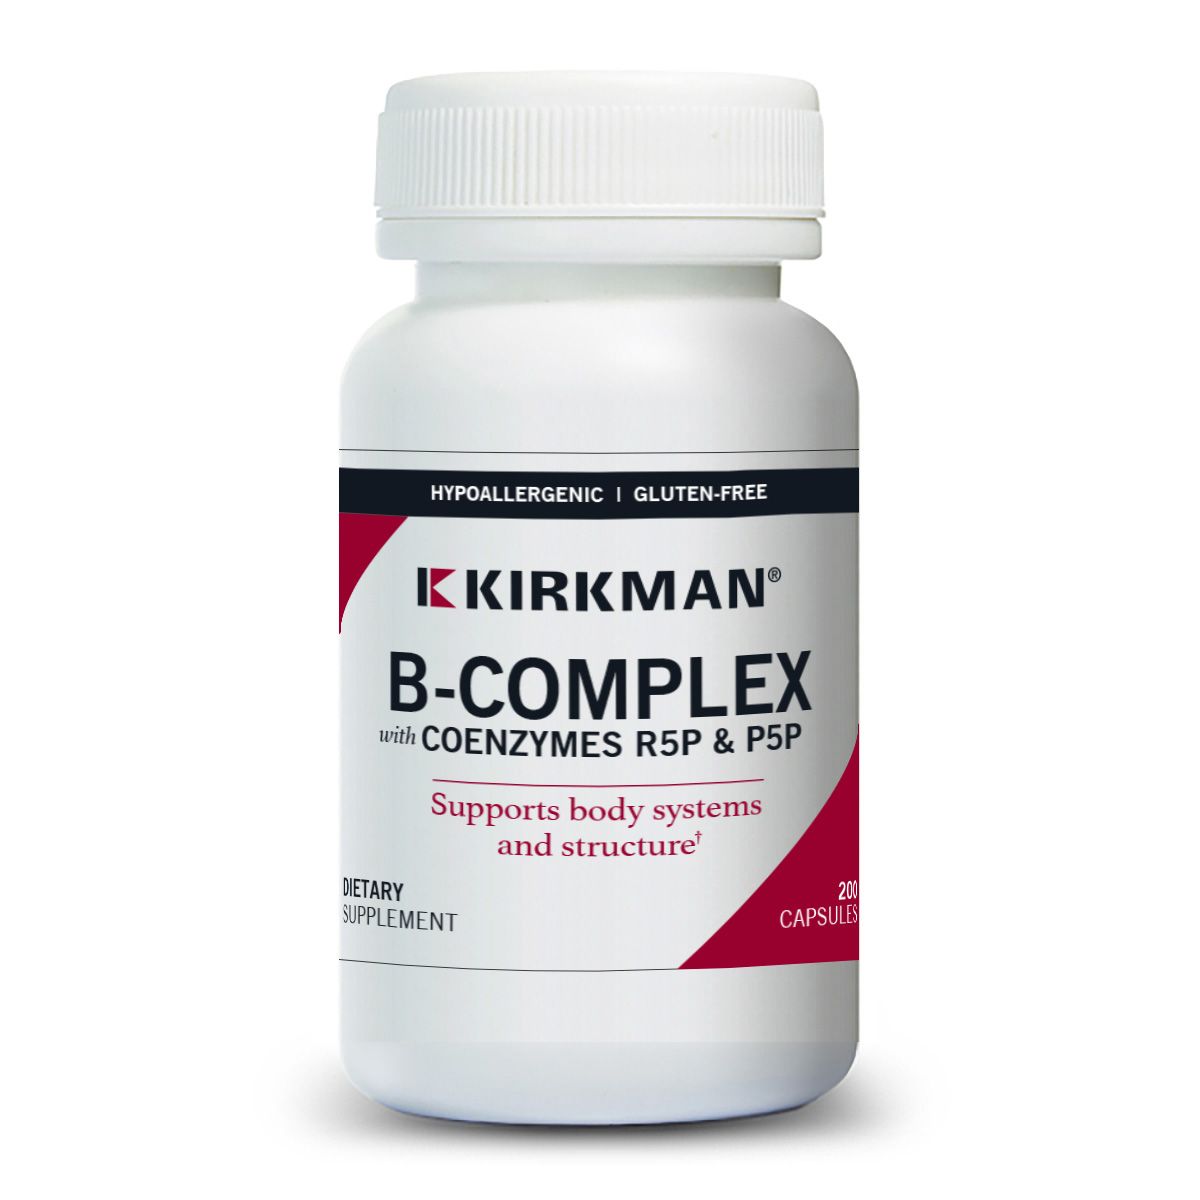 B-Complex with Coenzymes R5P & P5P - Hypoallergenic